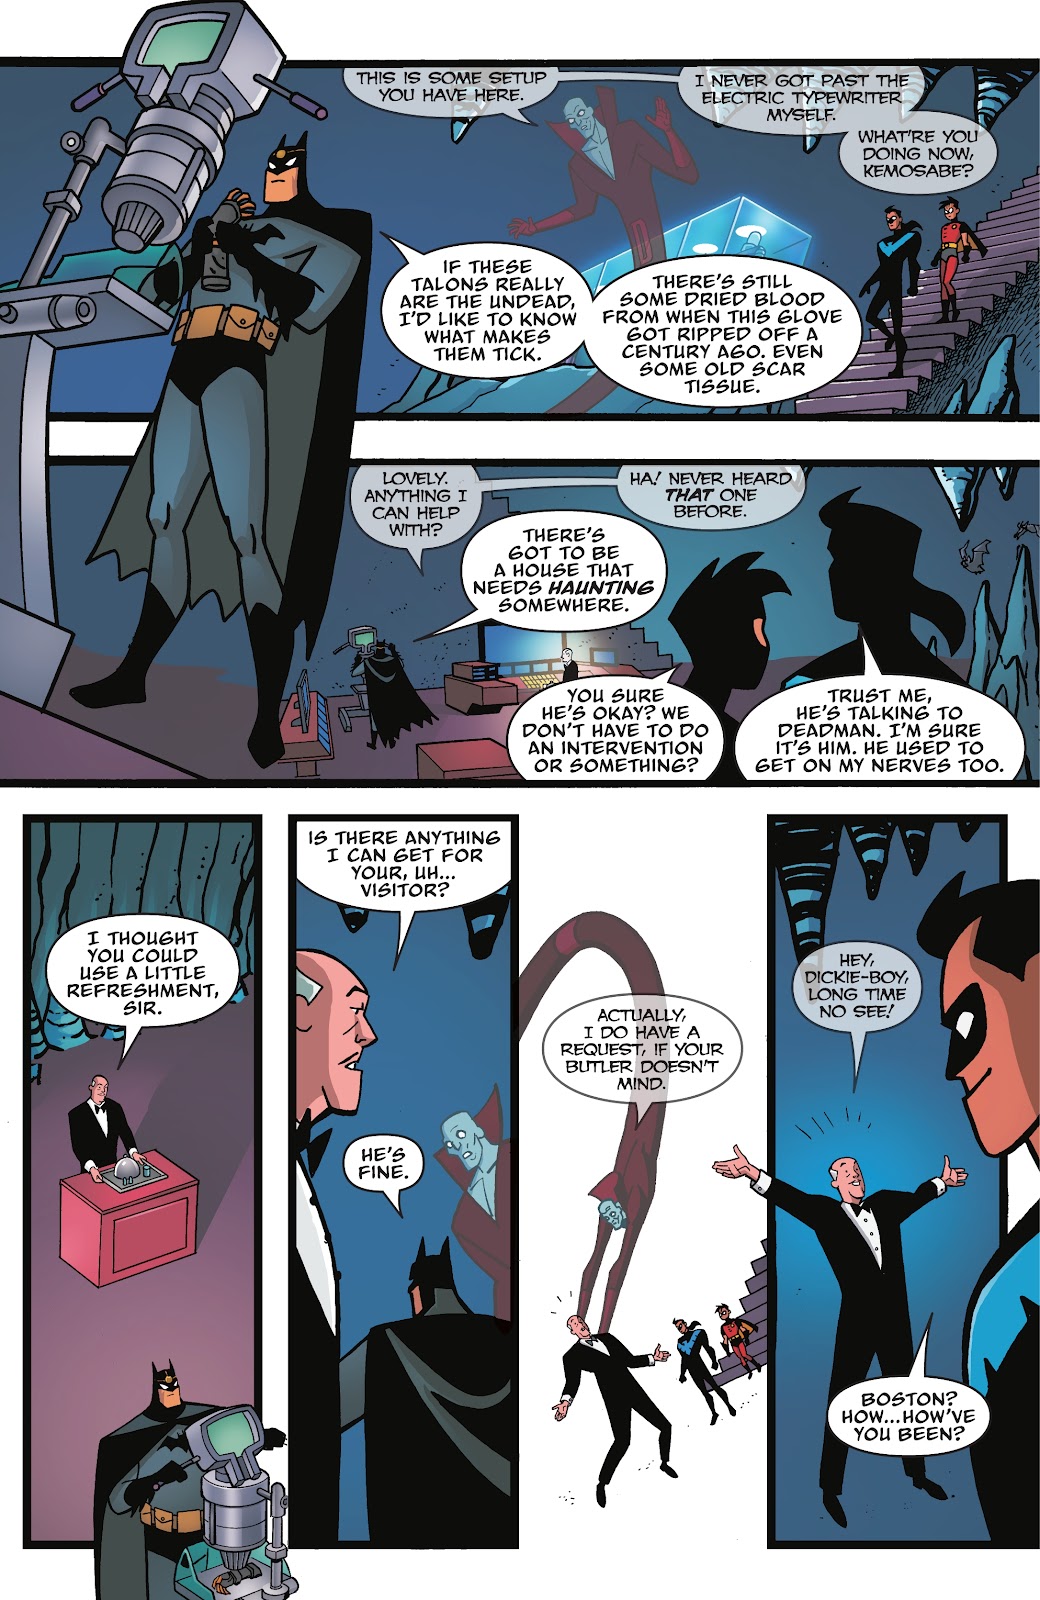 Batman: The Adventures Continue: Season Two issue 2 - Page 3